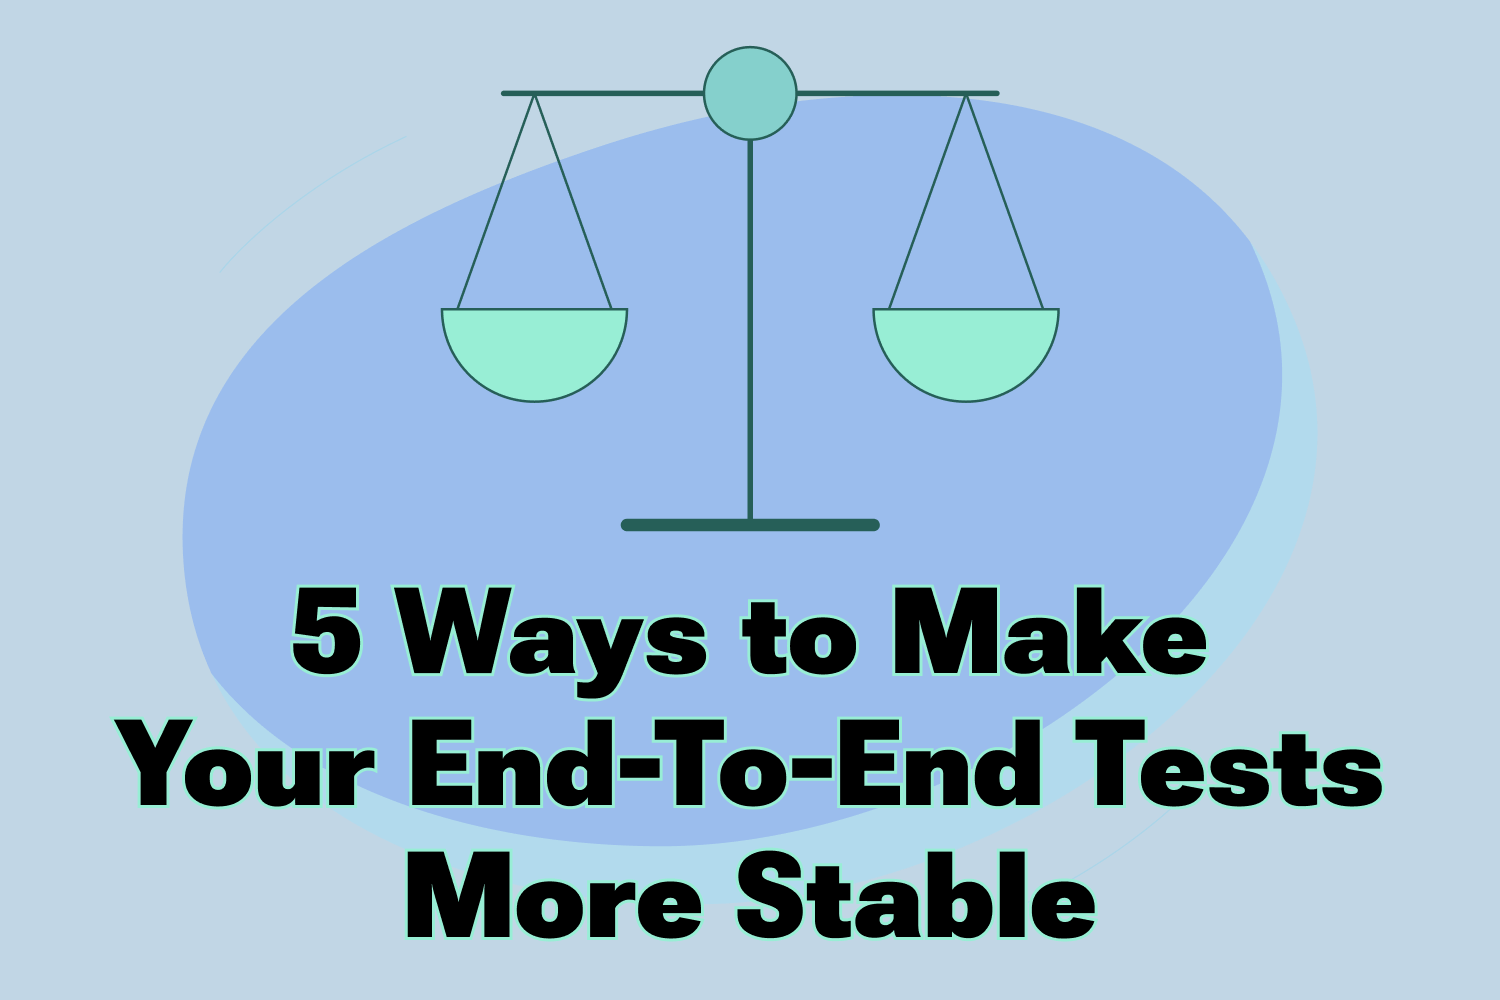 5 Ways to Make Your End-To-End Tests More Stable